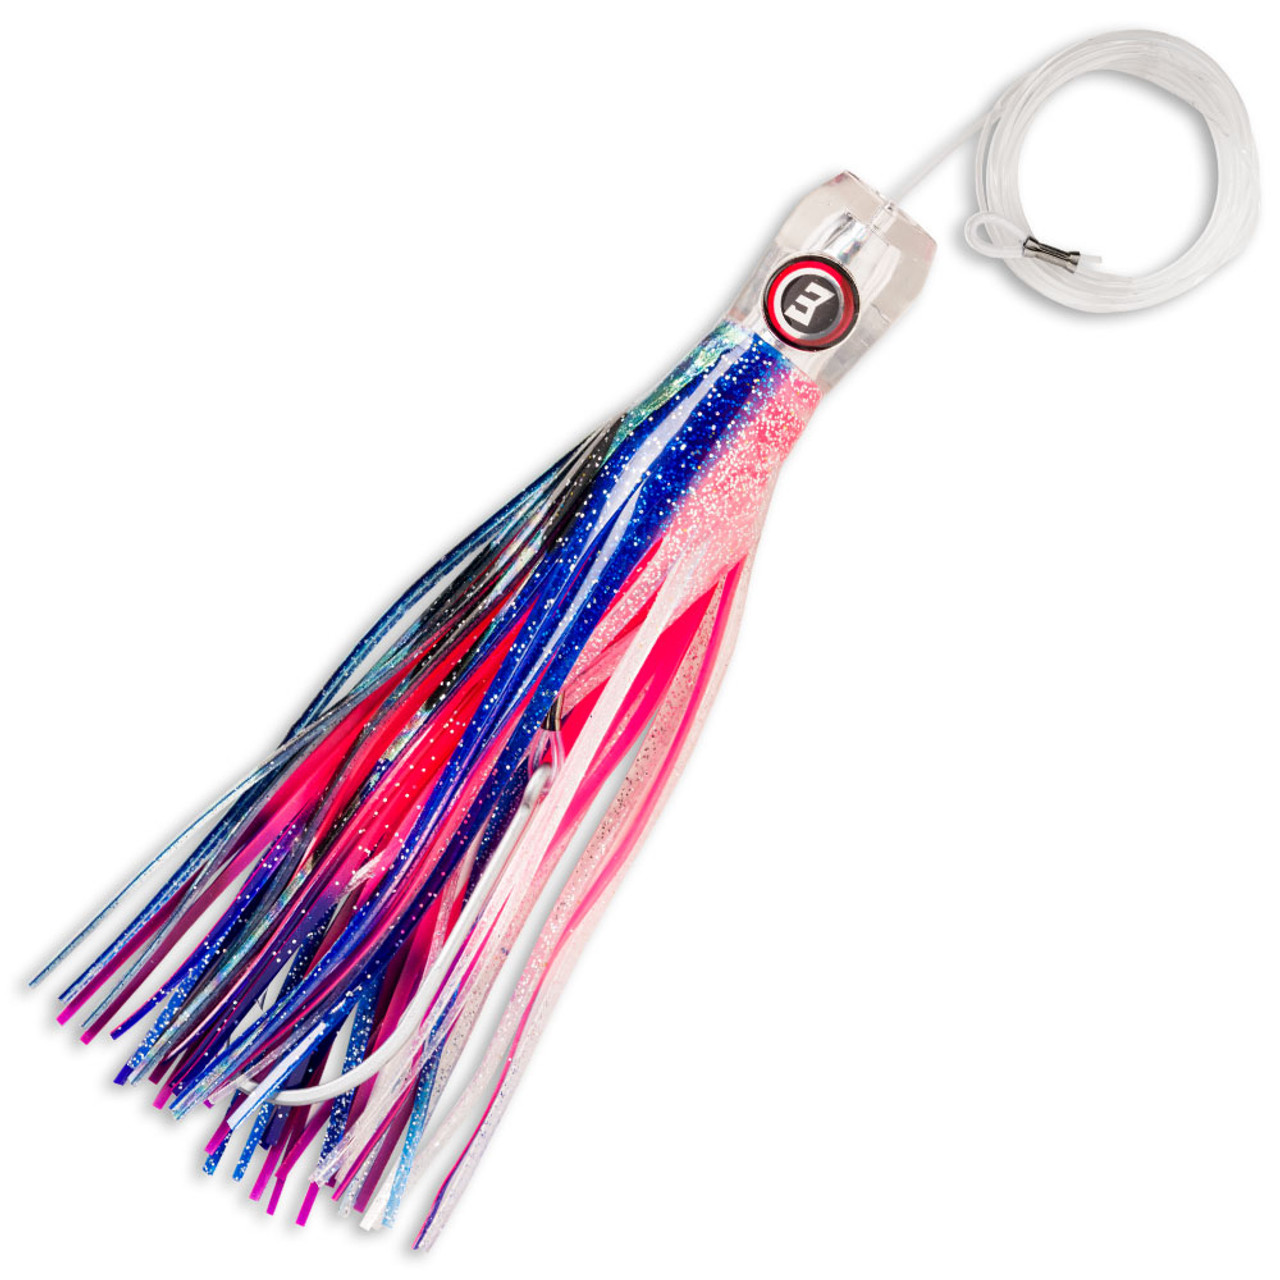 Williamson Lures Soft Sailfish Catcher SSCR5-PW Pink White Lure 140mm